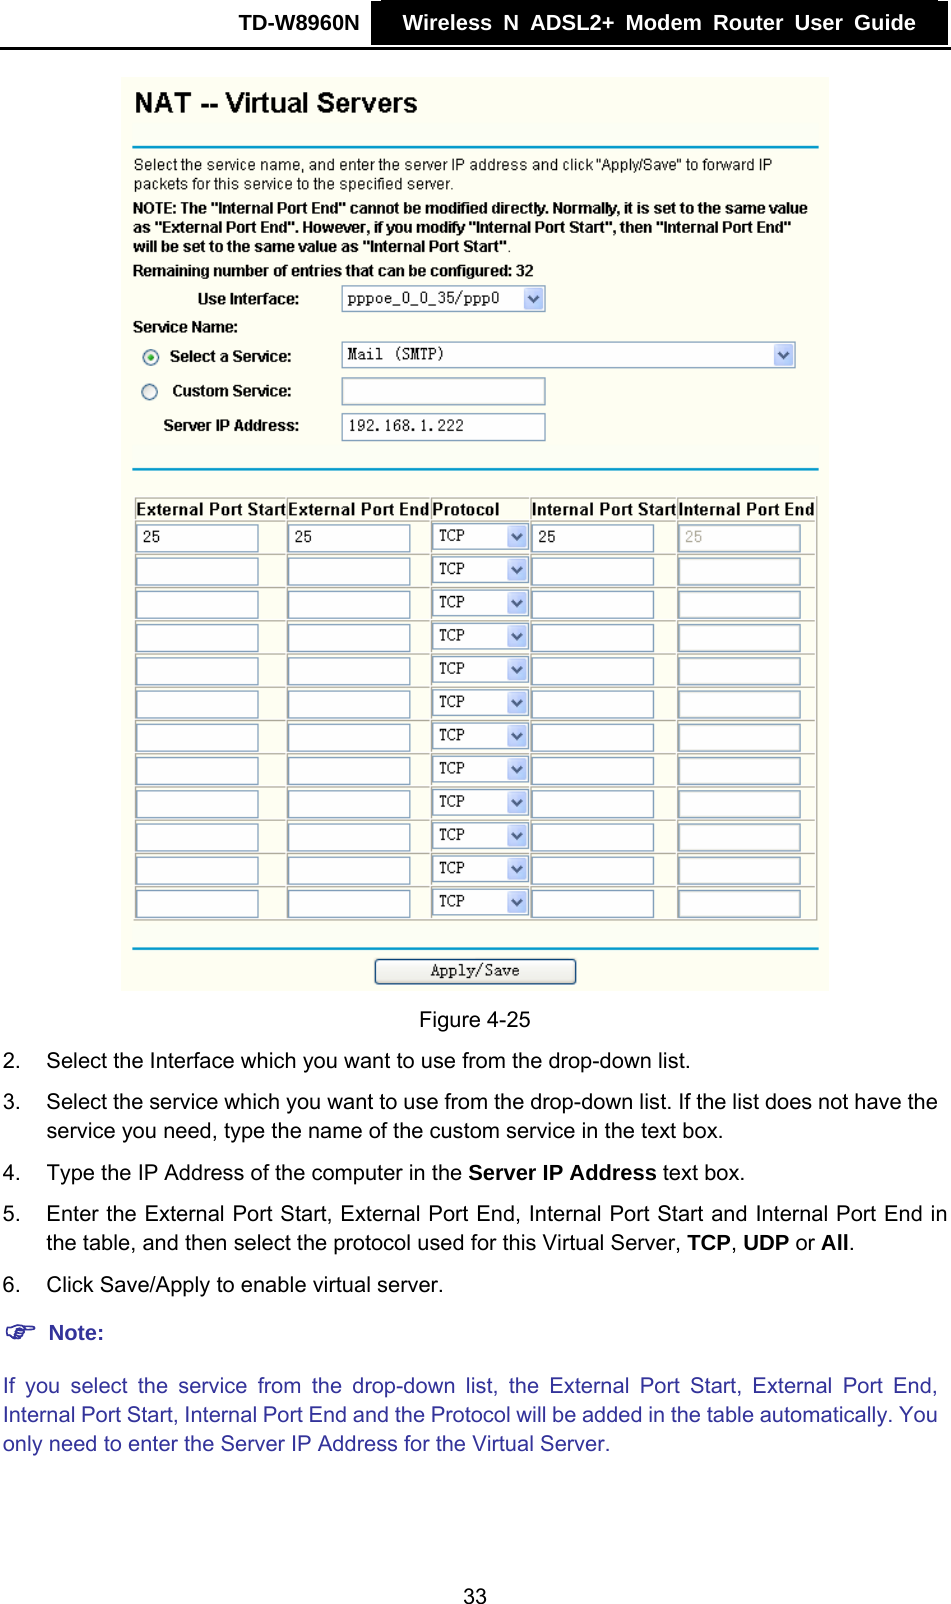 TD-W8960N    Wireless N ADSL2+ Modem Router User Guide     Figure 4-25 2.  Select the Interface which you want to use from the drop-down list. 3.  Select the service which you want to use from the drop-down list. If the list does not have the service you need, type the name of the custom service in the text box. 4.  Type the IP Address of the computer in the Server IP Address text box. 5.  Enter the External Port Start, External Port End, Internal Port Start and Internal Port End in the table, and then select the protocol used for this Virtual Server, TCP, UDP or All. 6.  Click Save/Apply to enable virtual server. ) Note: If you select the service from the drop-down list, the External Port Start, External Port End, Internal Port Start, Internal Port End and the Protocol will be added in the table automatically. You only need to enter the Server IP Address for the Virtual Server. 33 